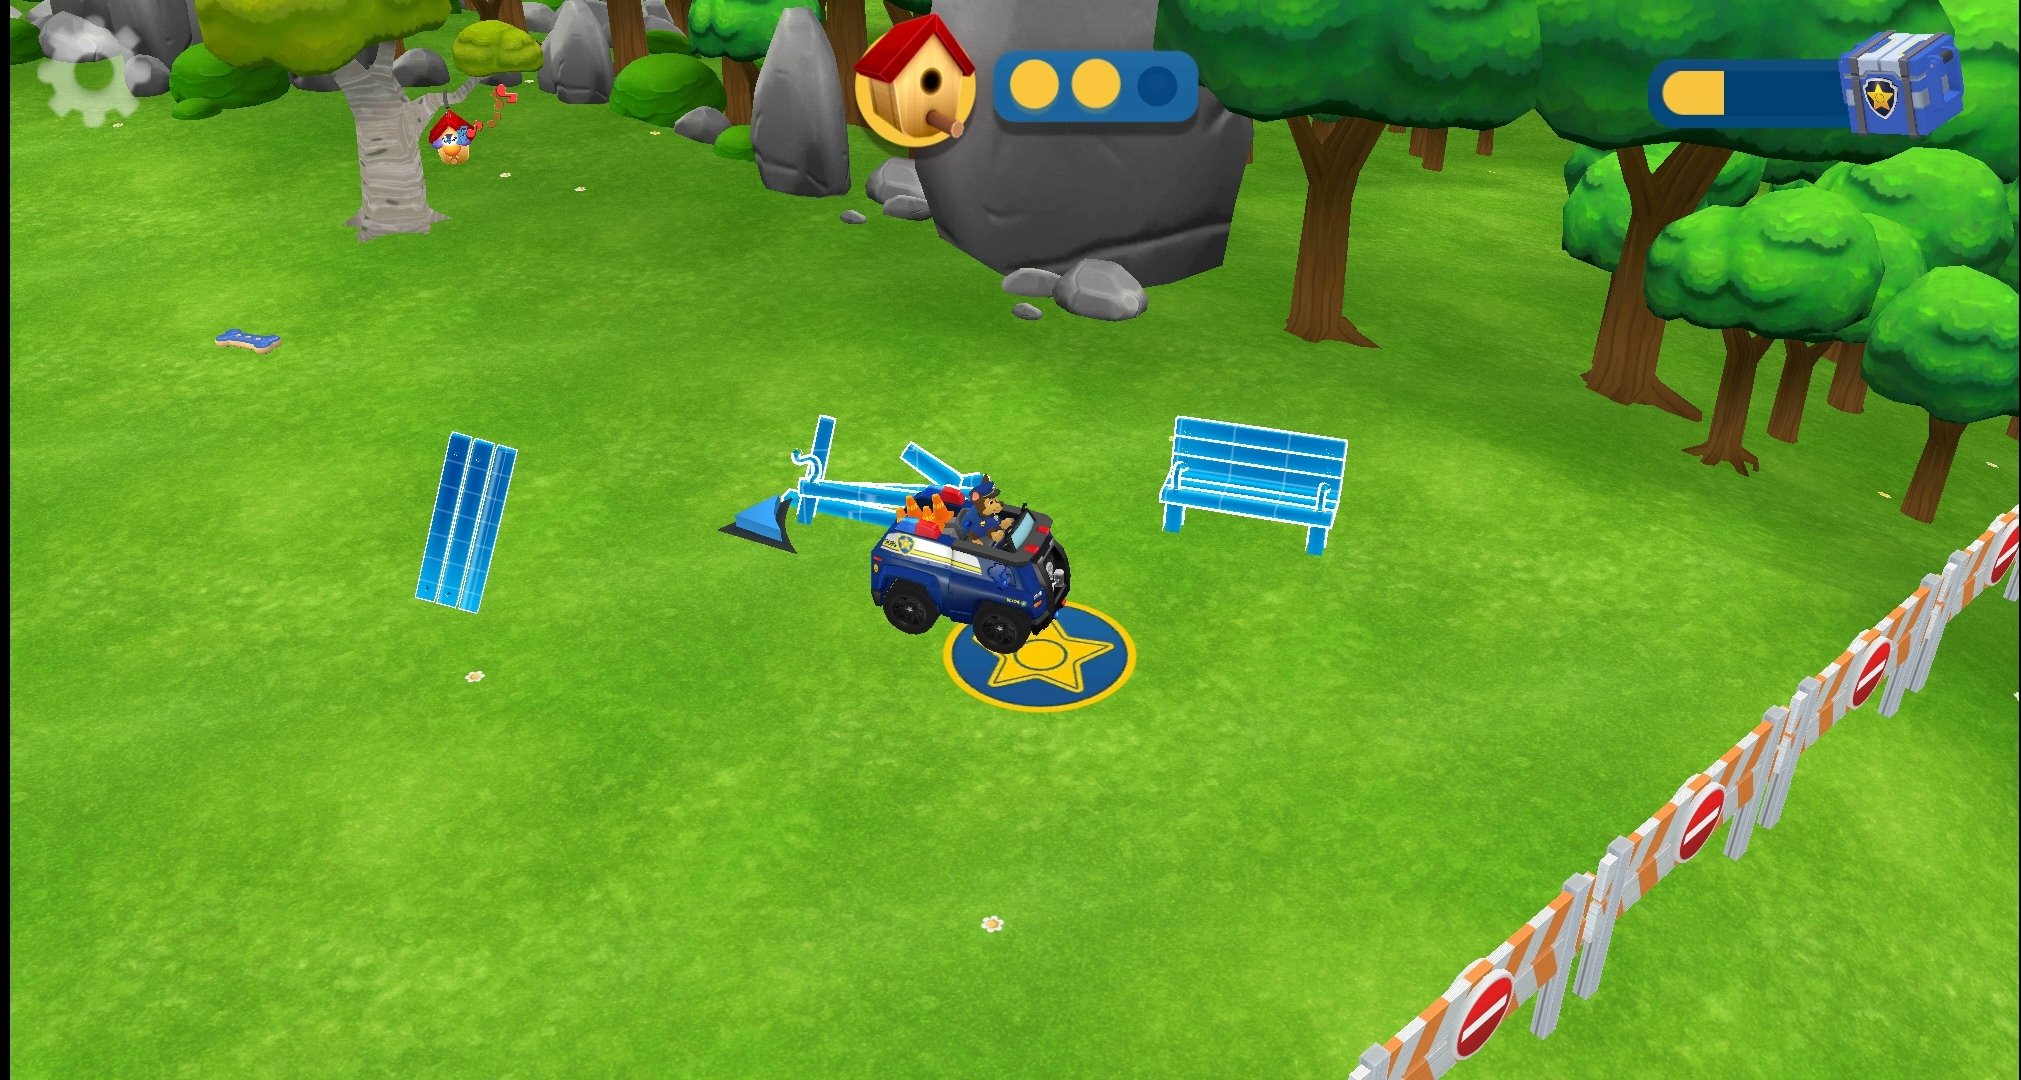 PAW Patrol Rescue World - Apps on Google Play